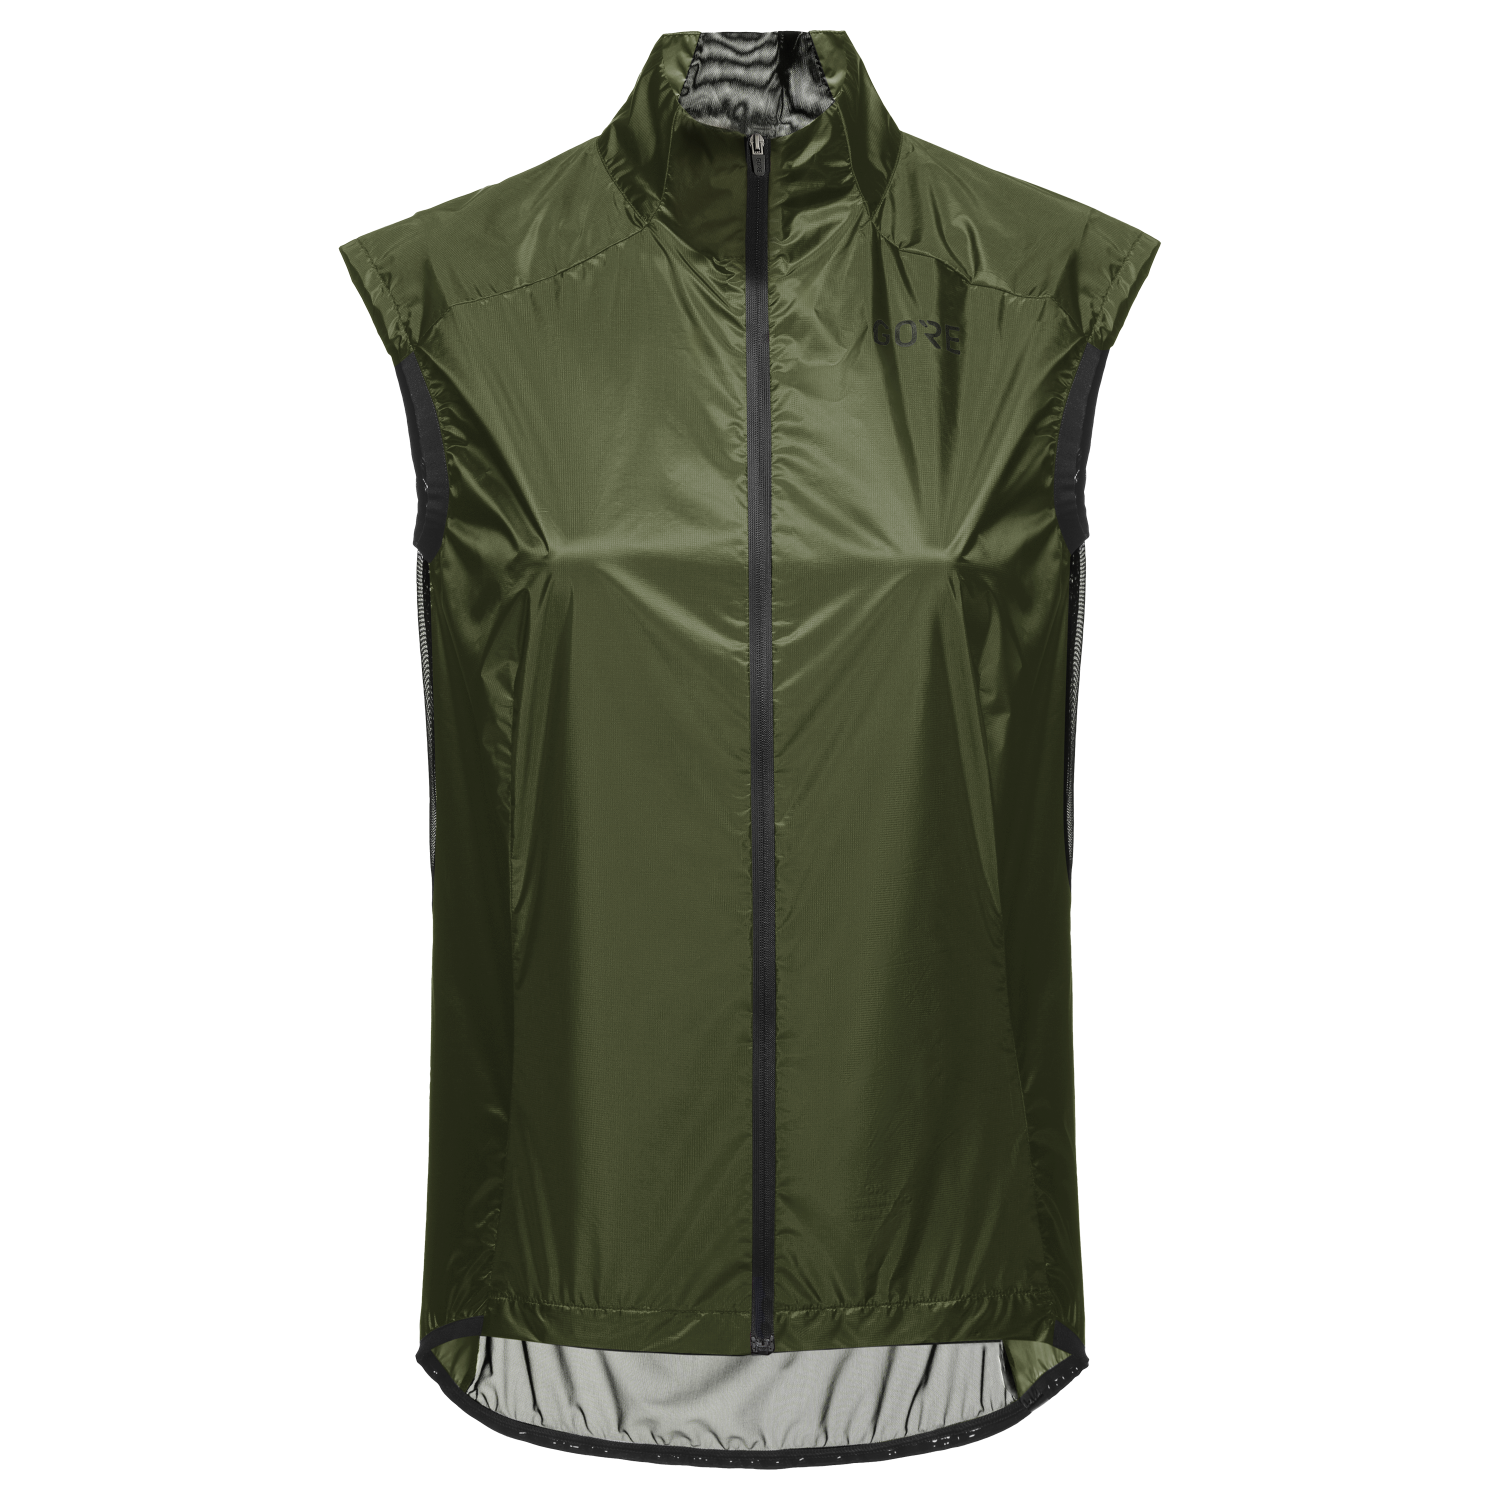 GOREWEAR Ambient Cycling Vest Women's in Utility Green/Black | XS (0-2) | Form fit | Windproof